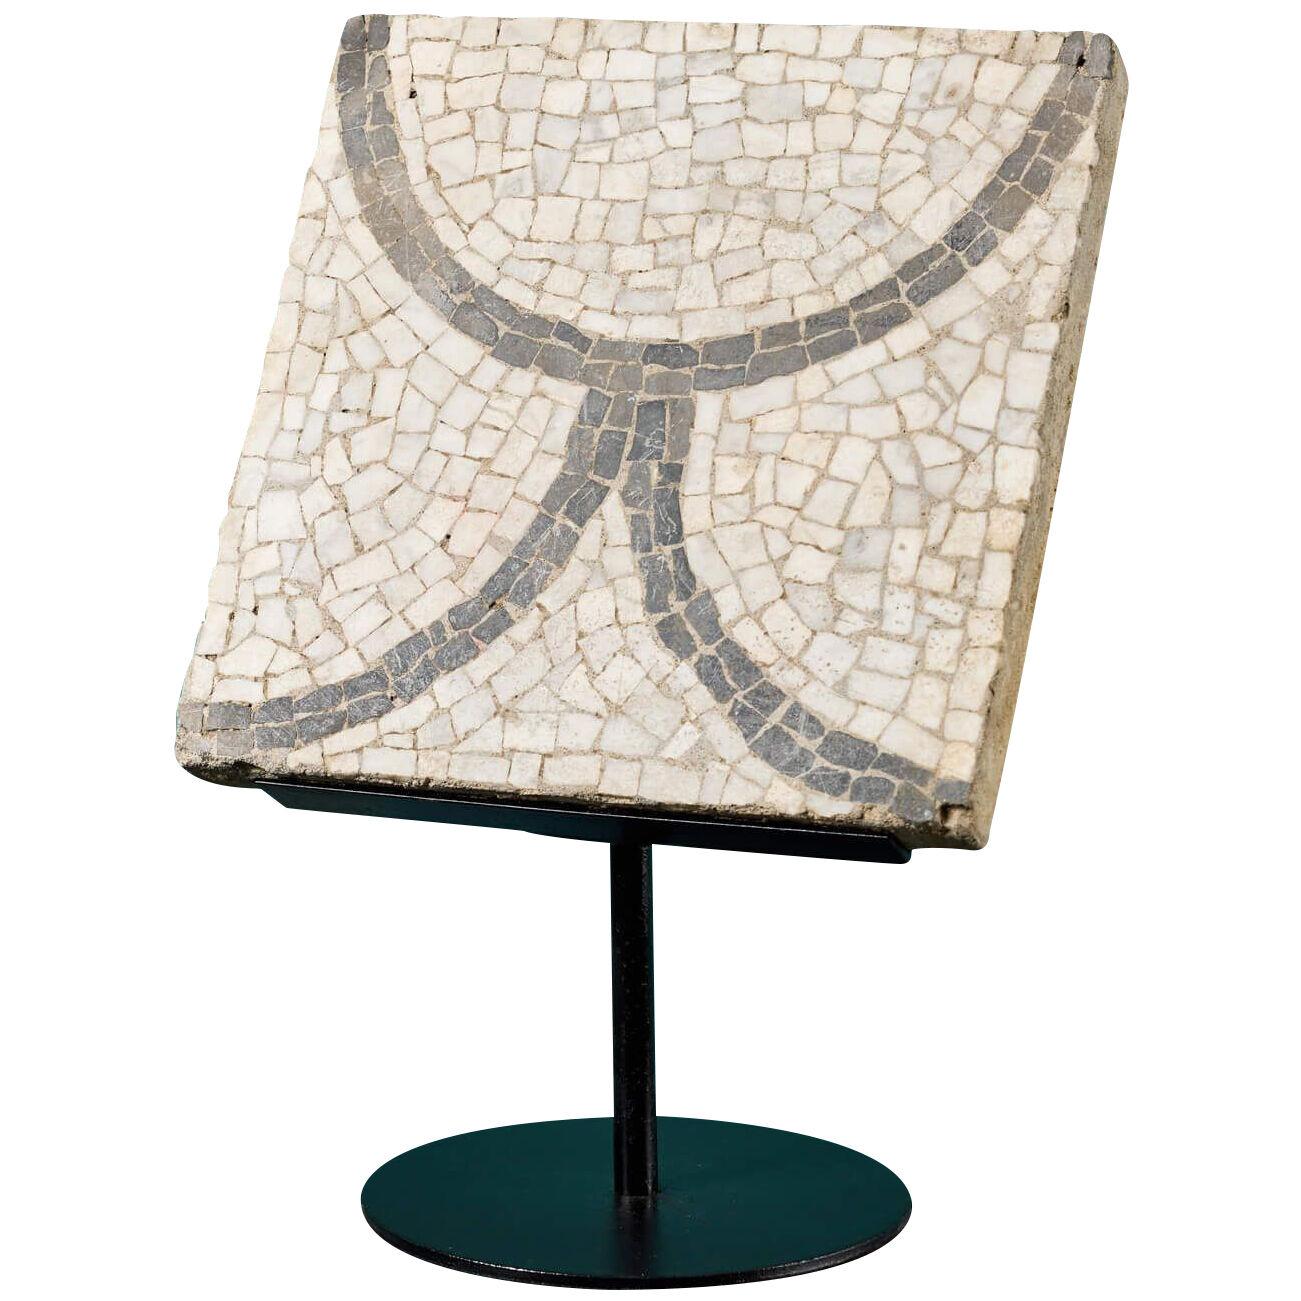 Roman Style Mosaic Fragment on Stand